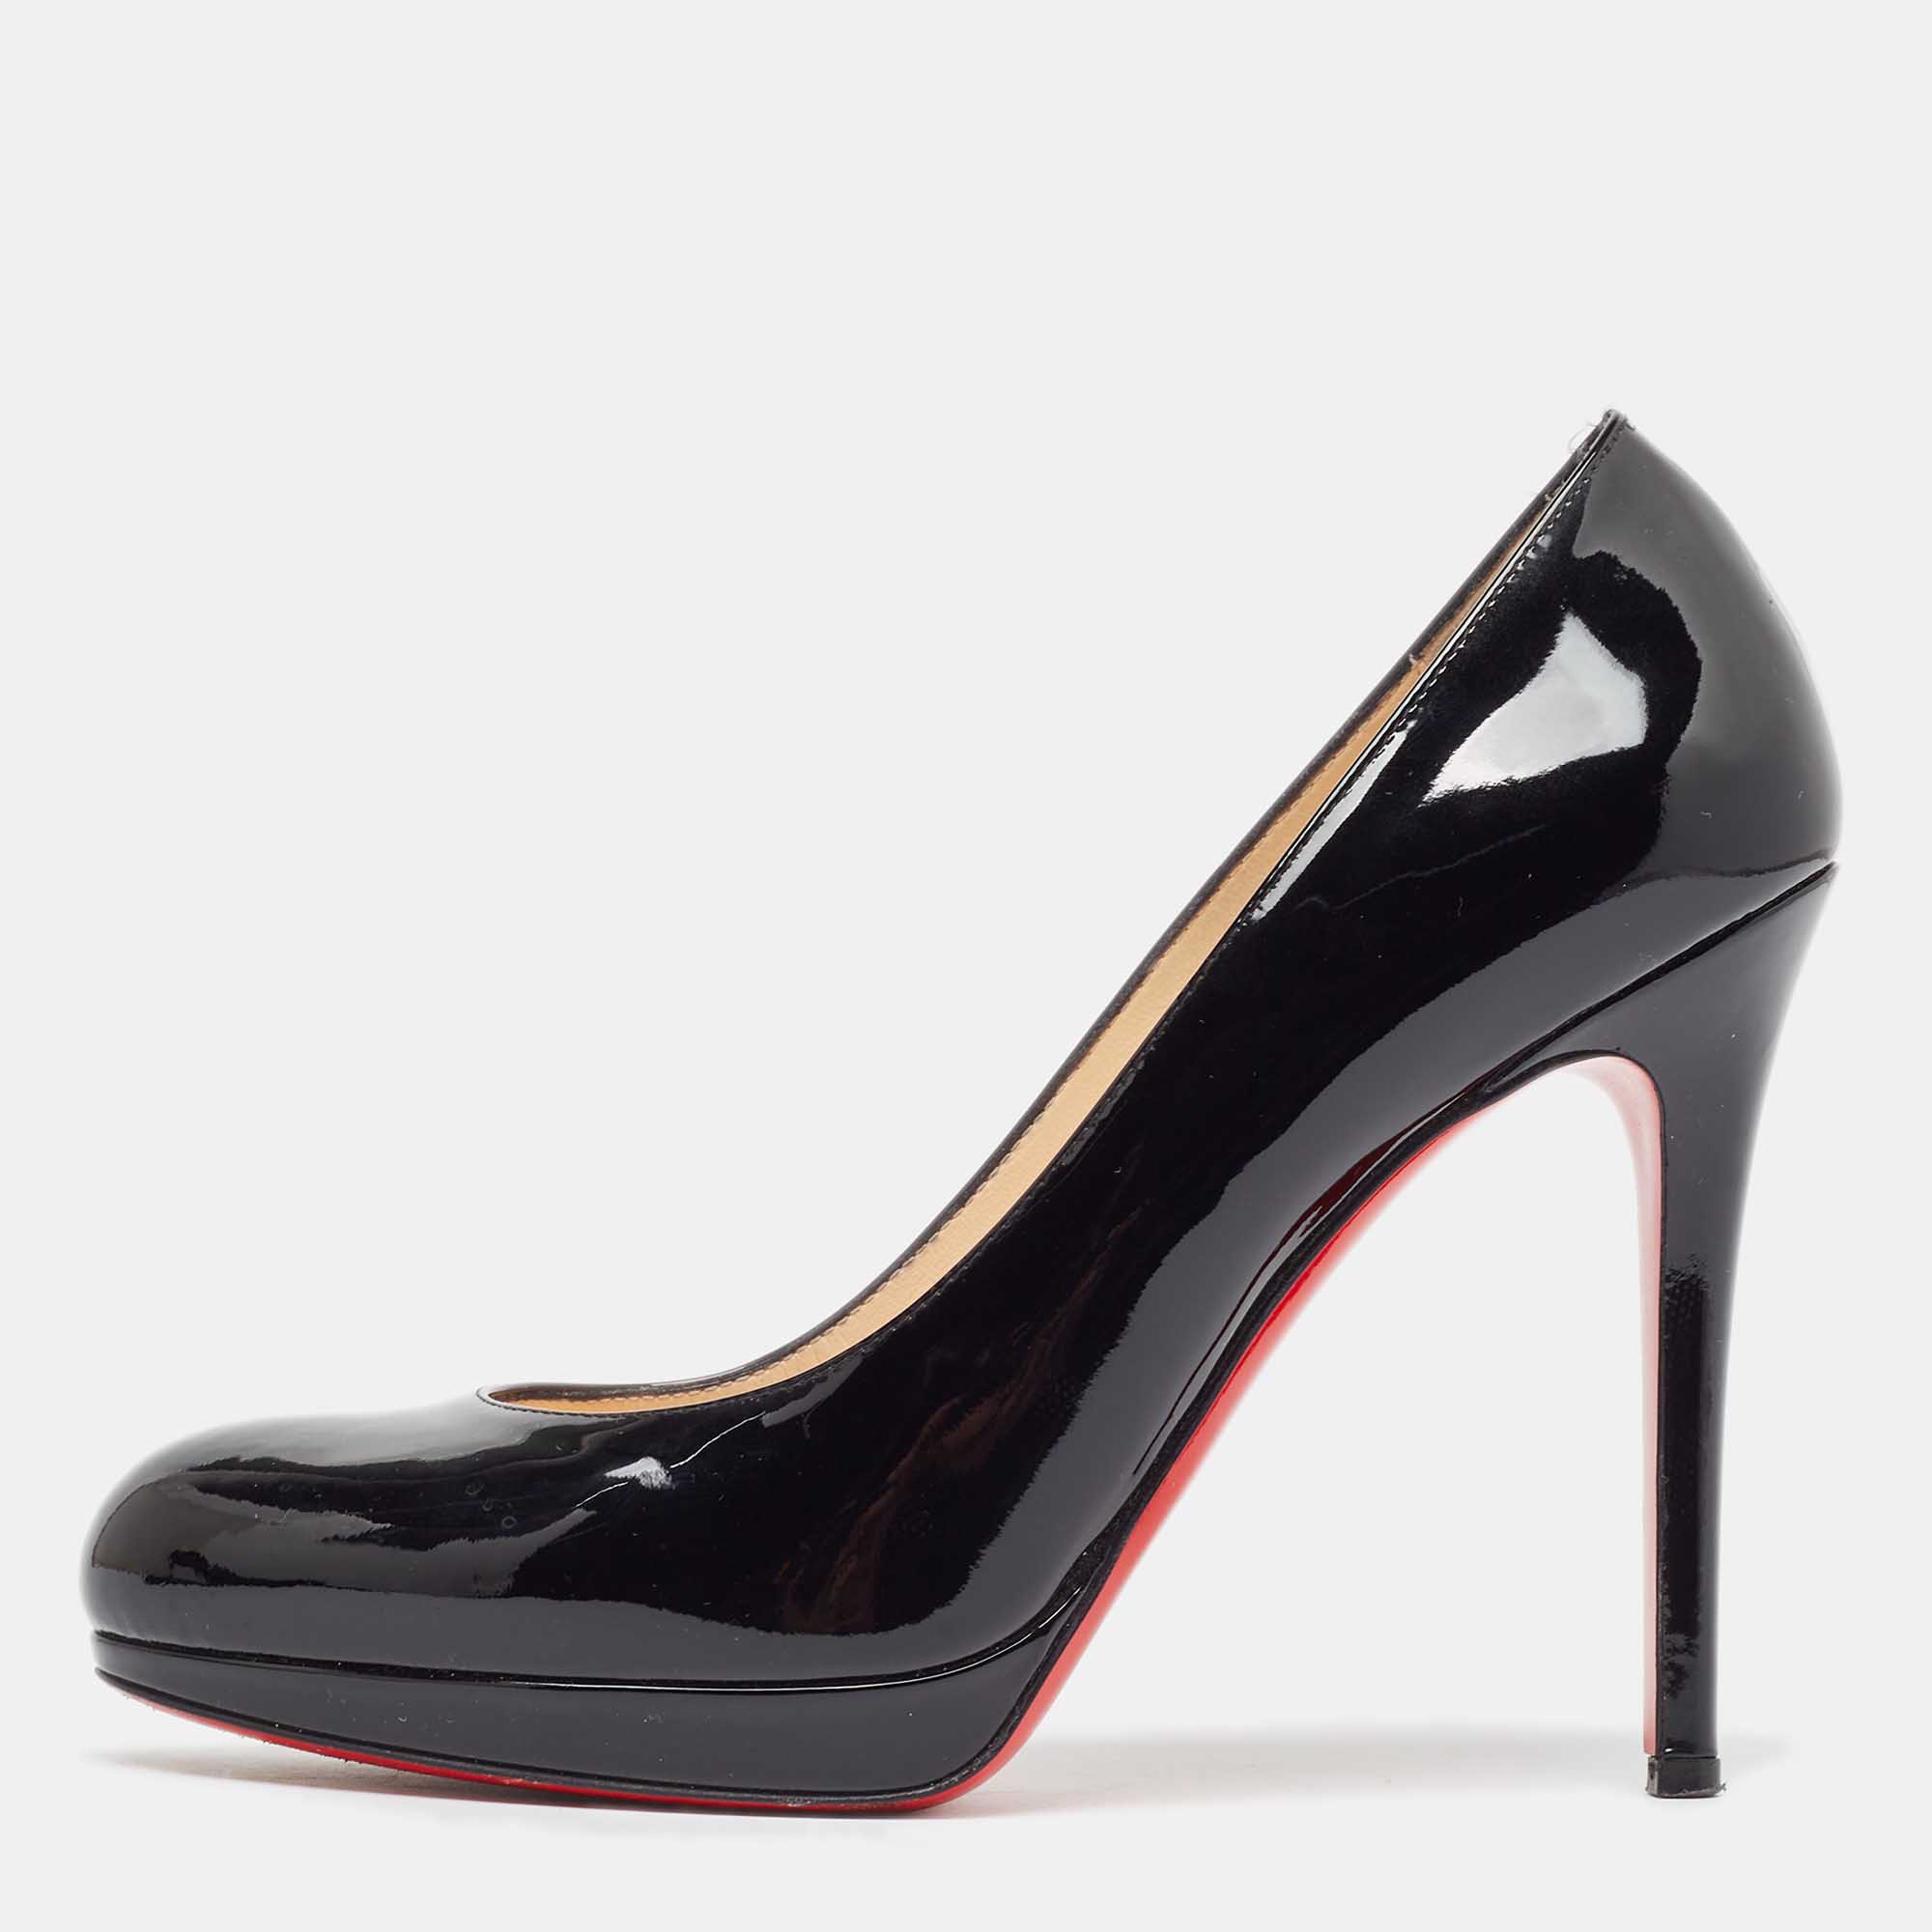 Christian louboutin black patent leather new simple pumps size 37.5